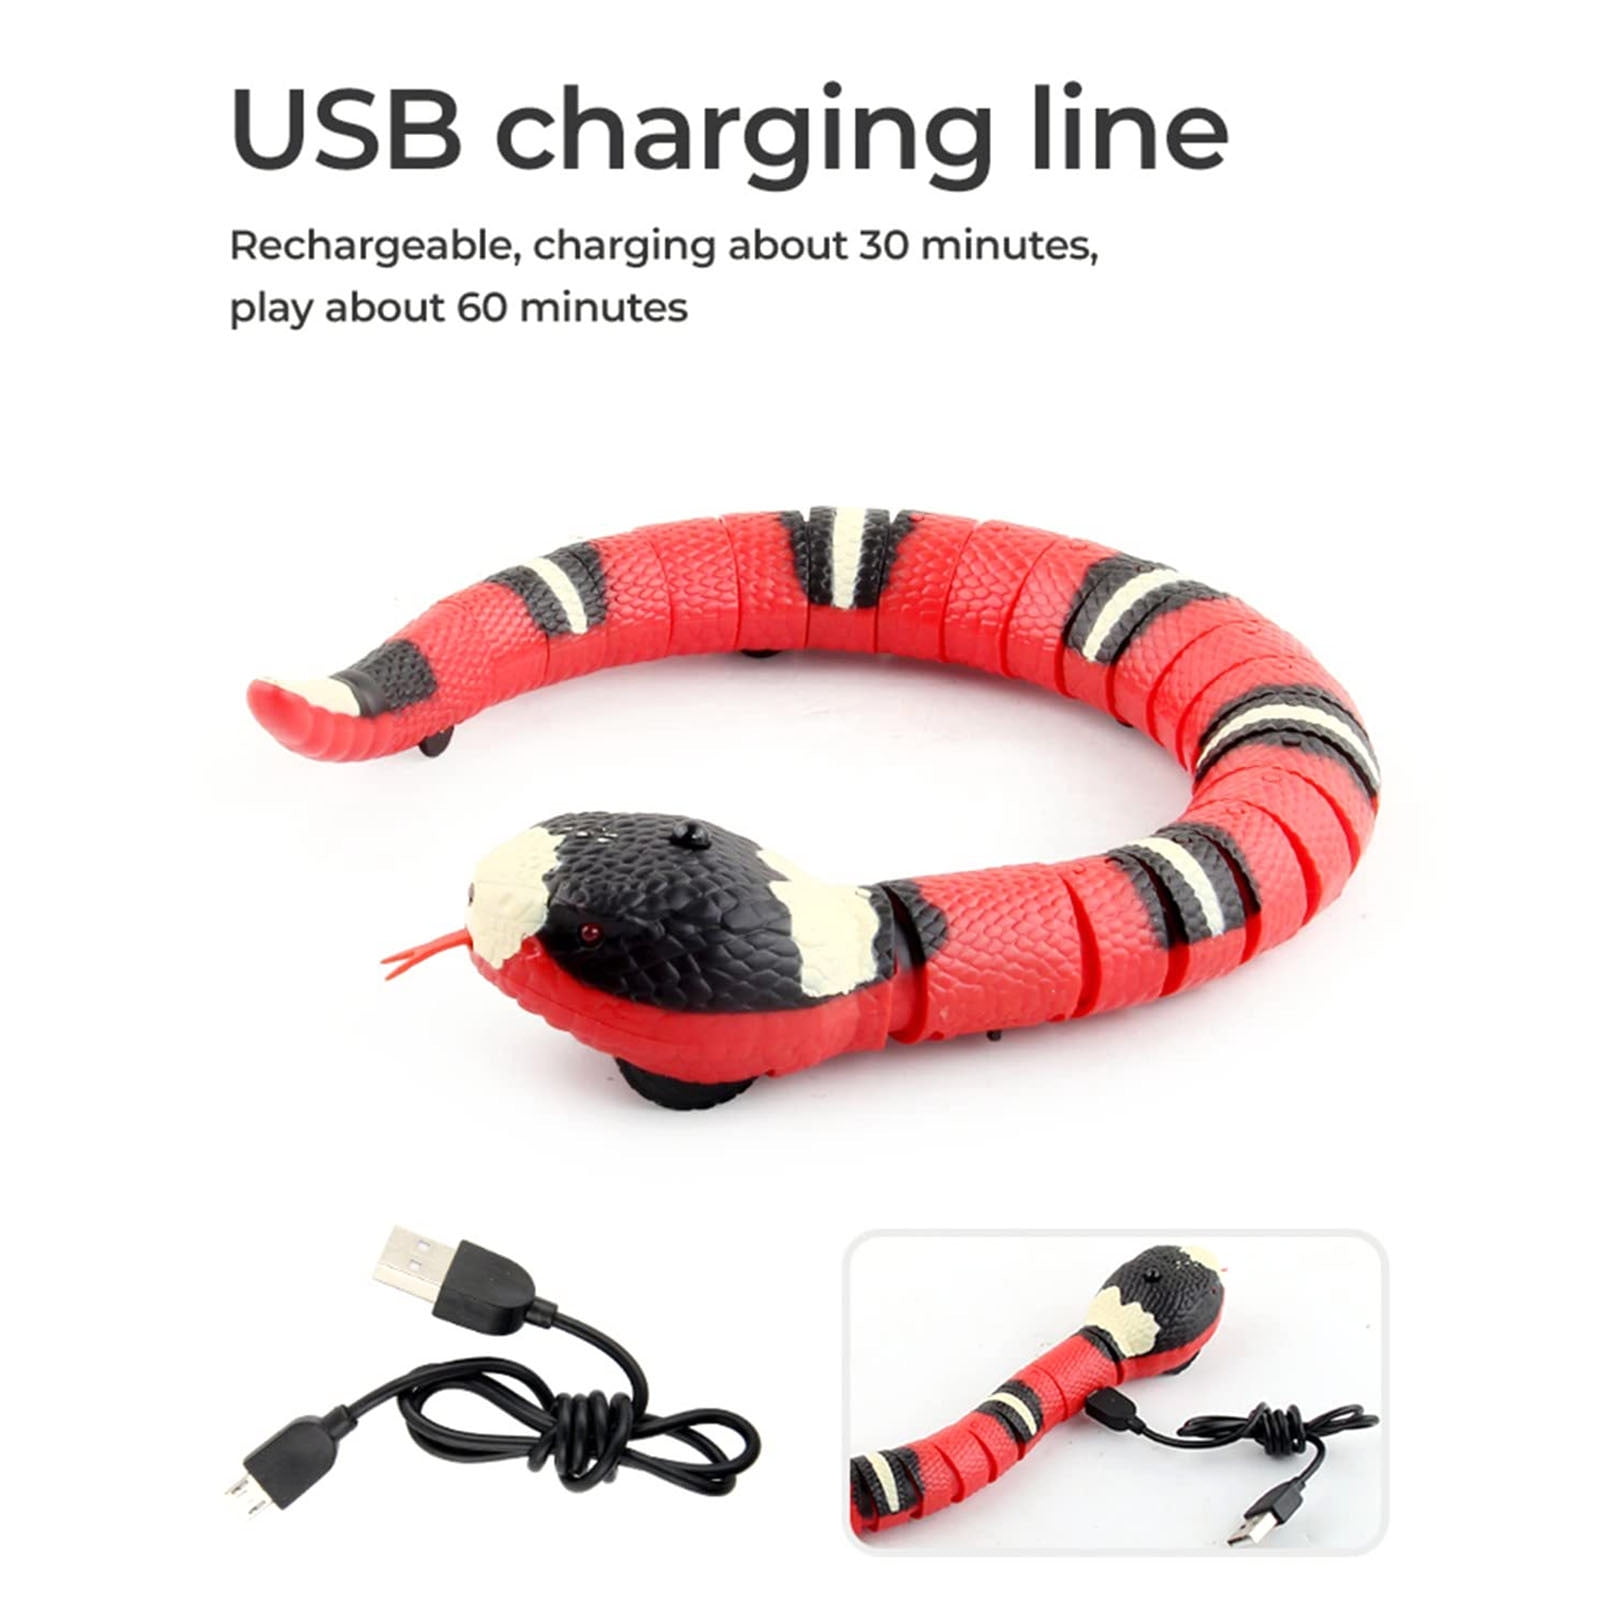  AMCHSURI Electric Snake Toy, Smart Sensing Snake Cat Toy with  USB Rechargeable Snake Toy for Cats Snake Toy That Moves Snake Toy for Cat  40cm : Pet Supplies